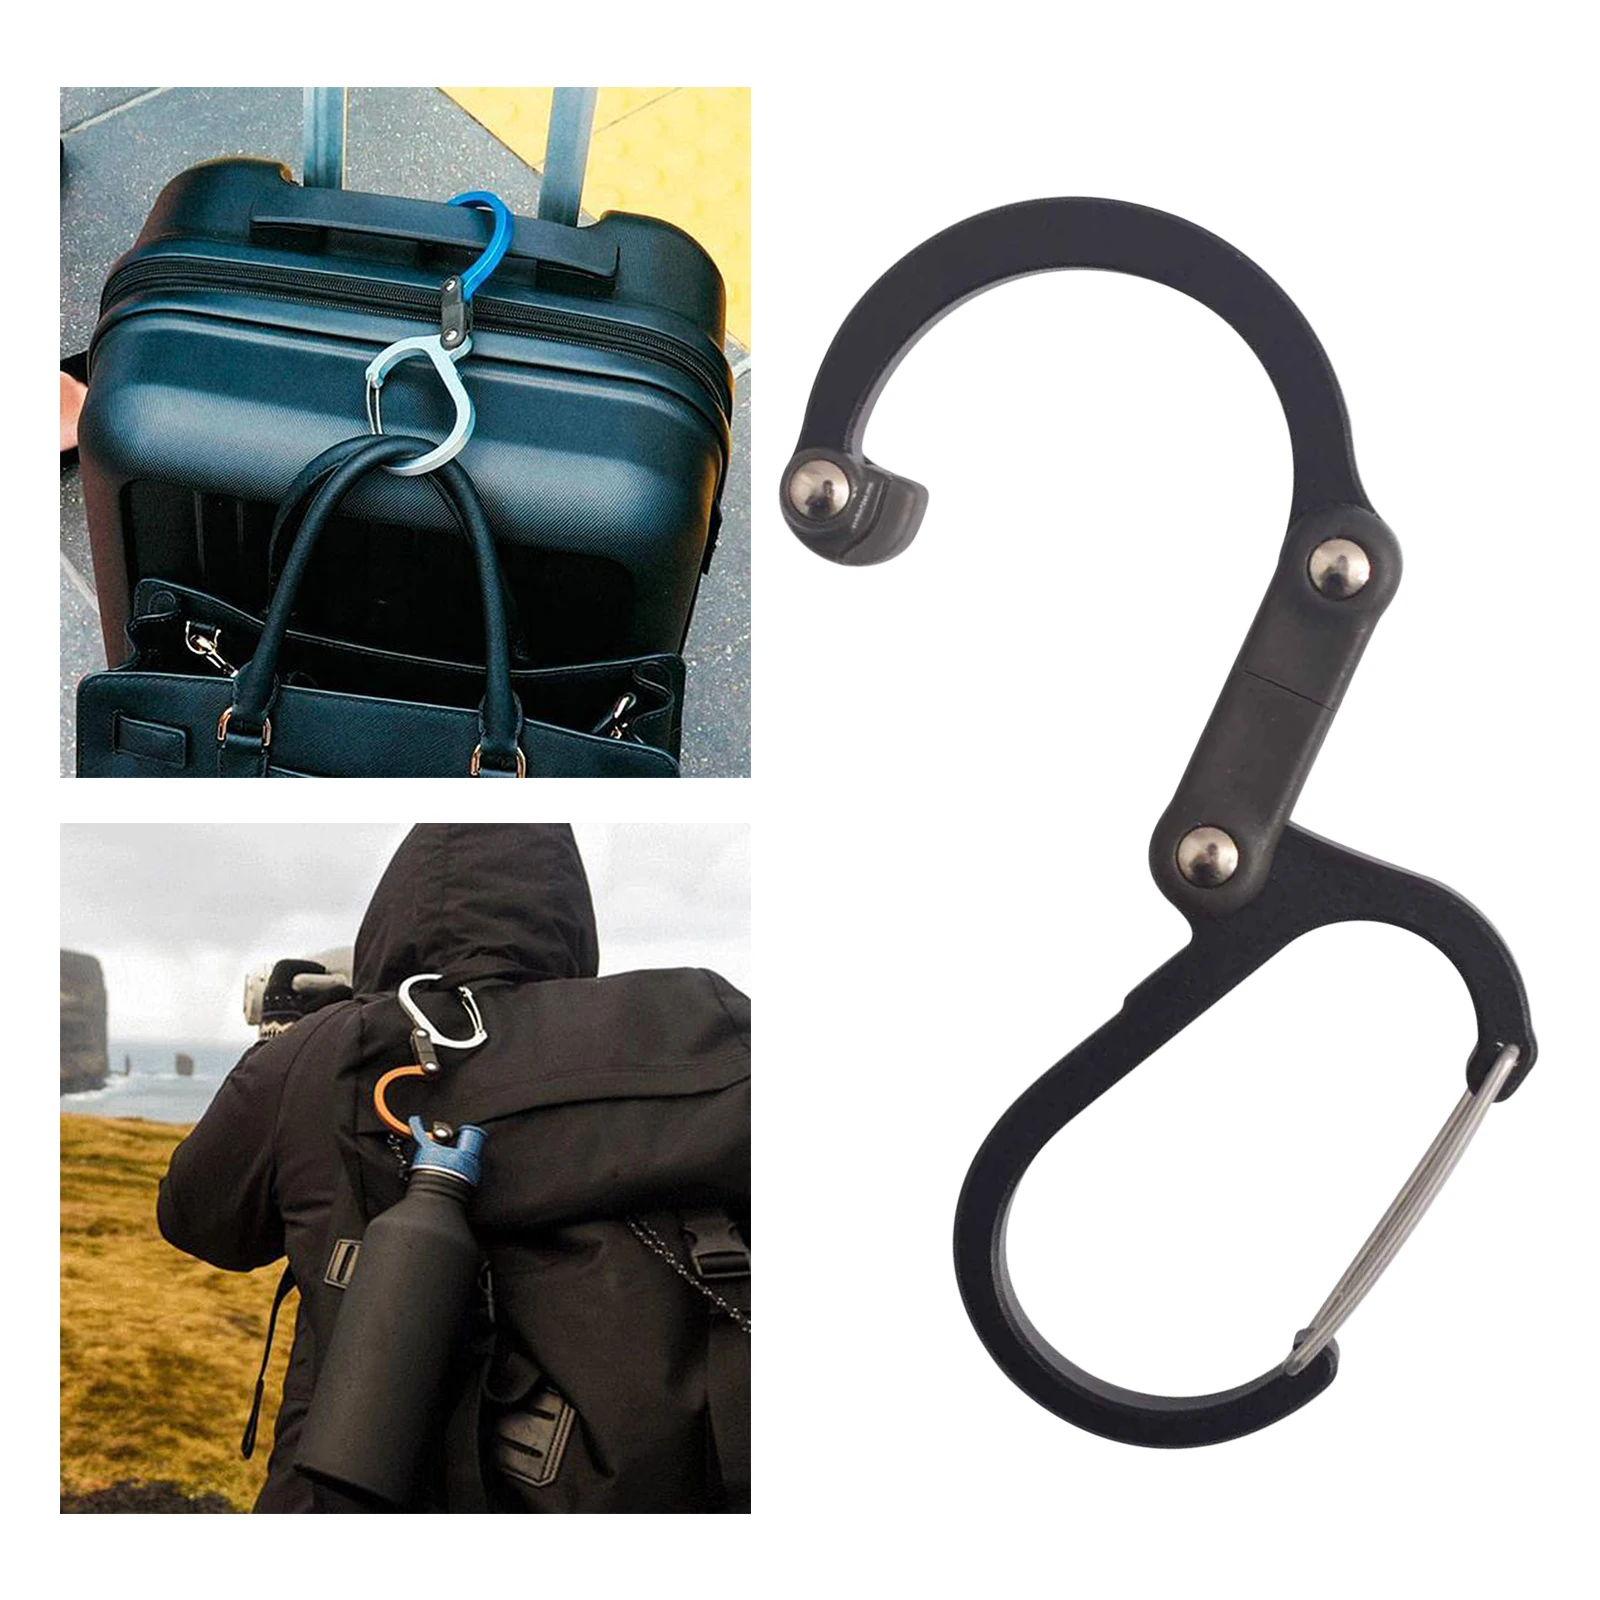 Backpack Light With Carabiner Clip